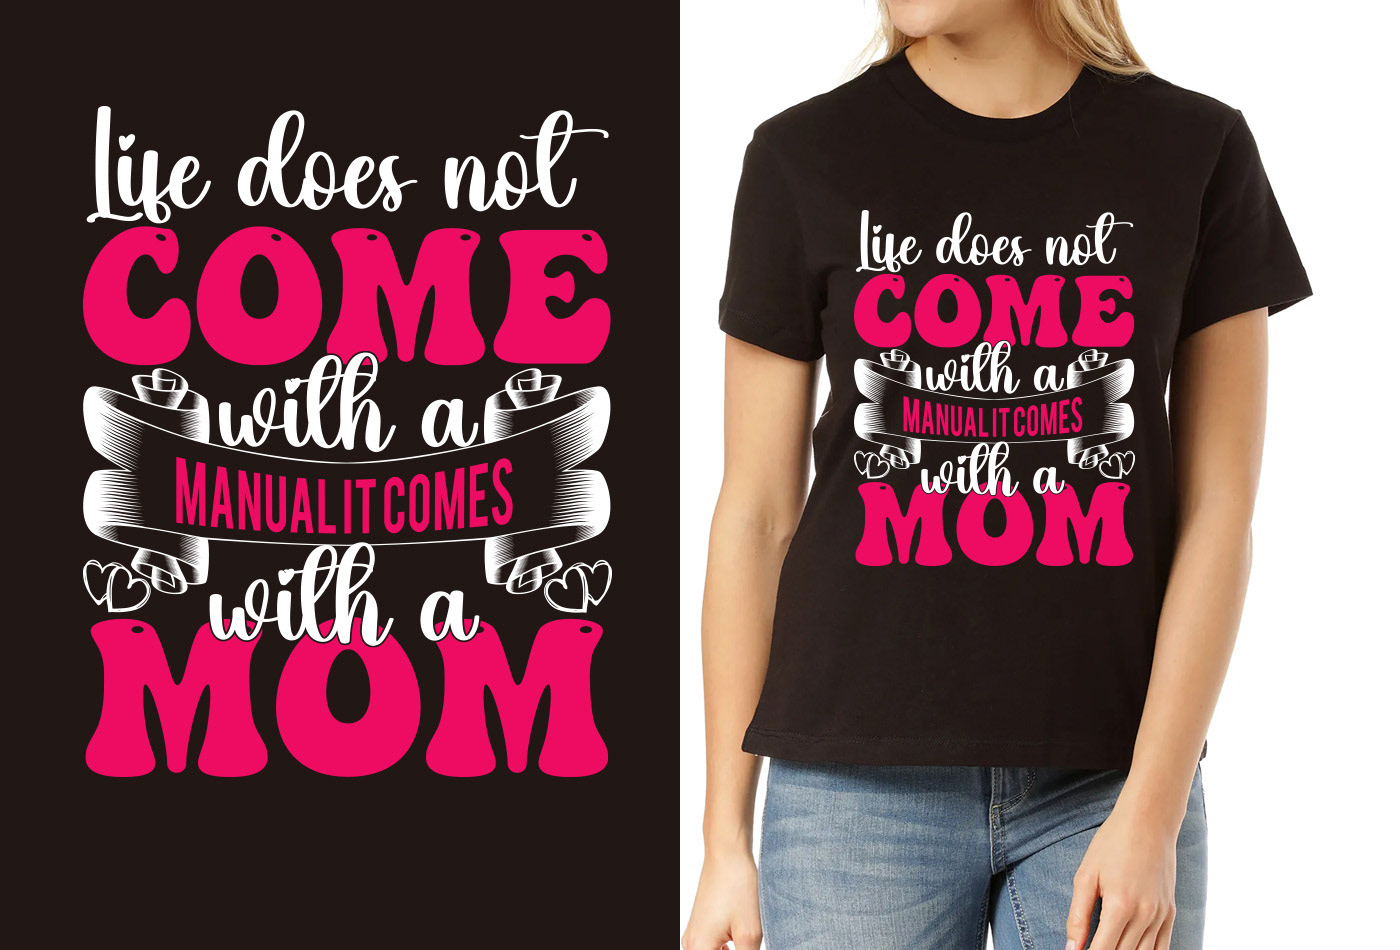 t-shirt typography   MOM t-shirt Mother's Day mom i love mom mom t shirt design mother t shirt mothers day tshirt design woman t-shirt design